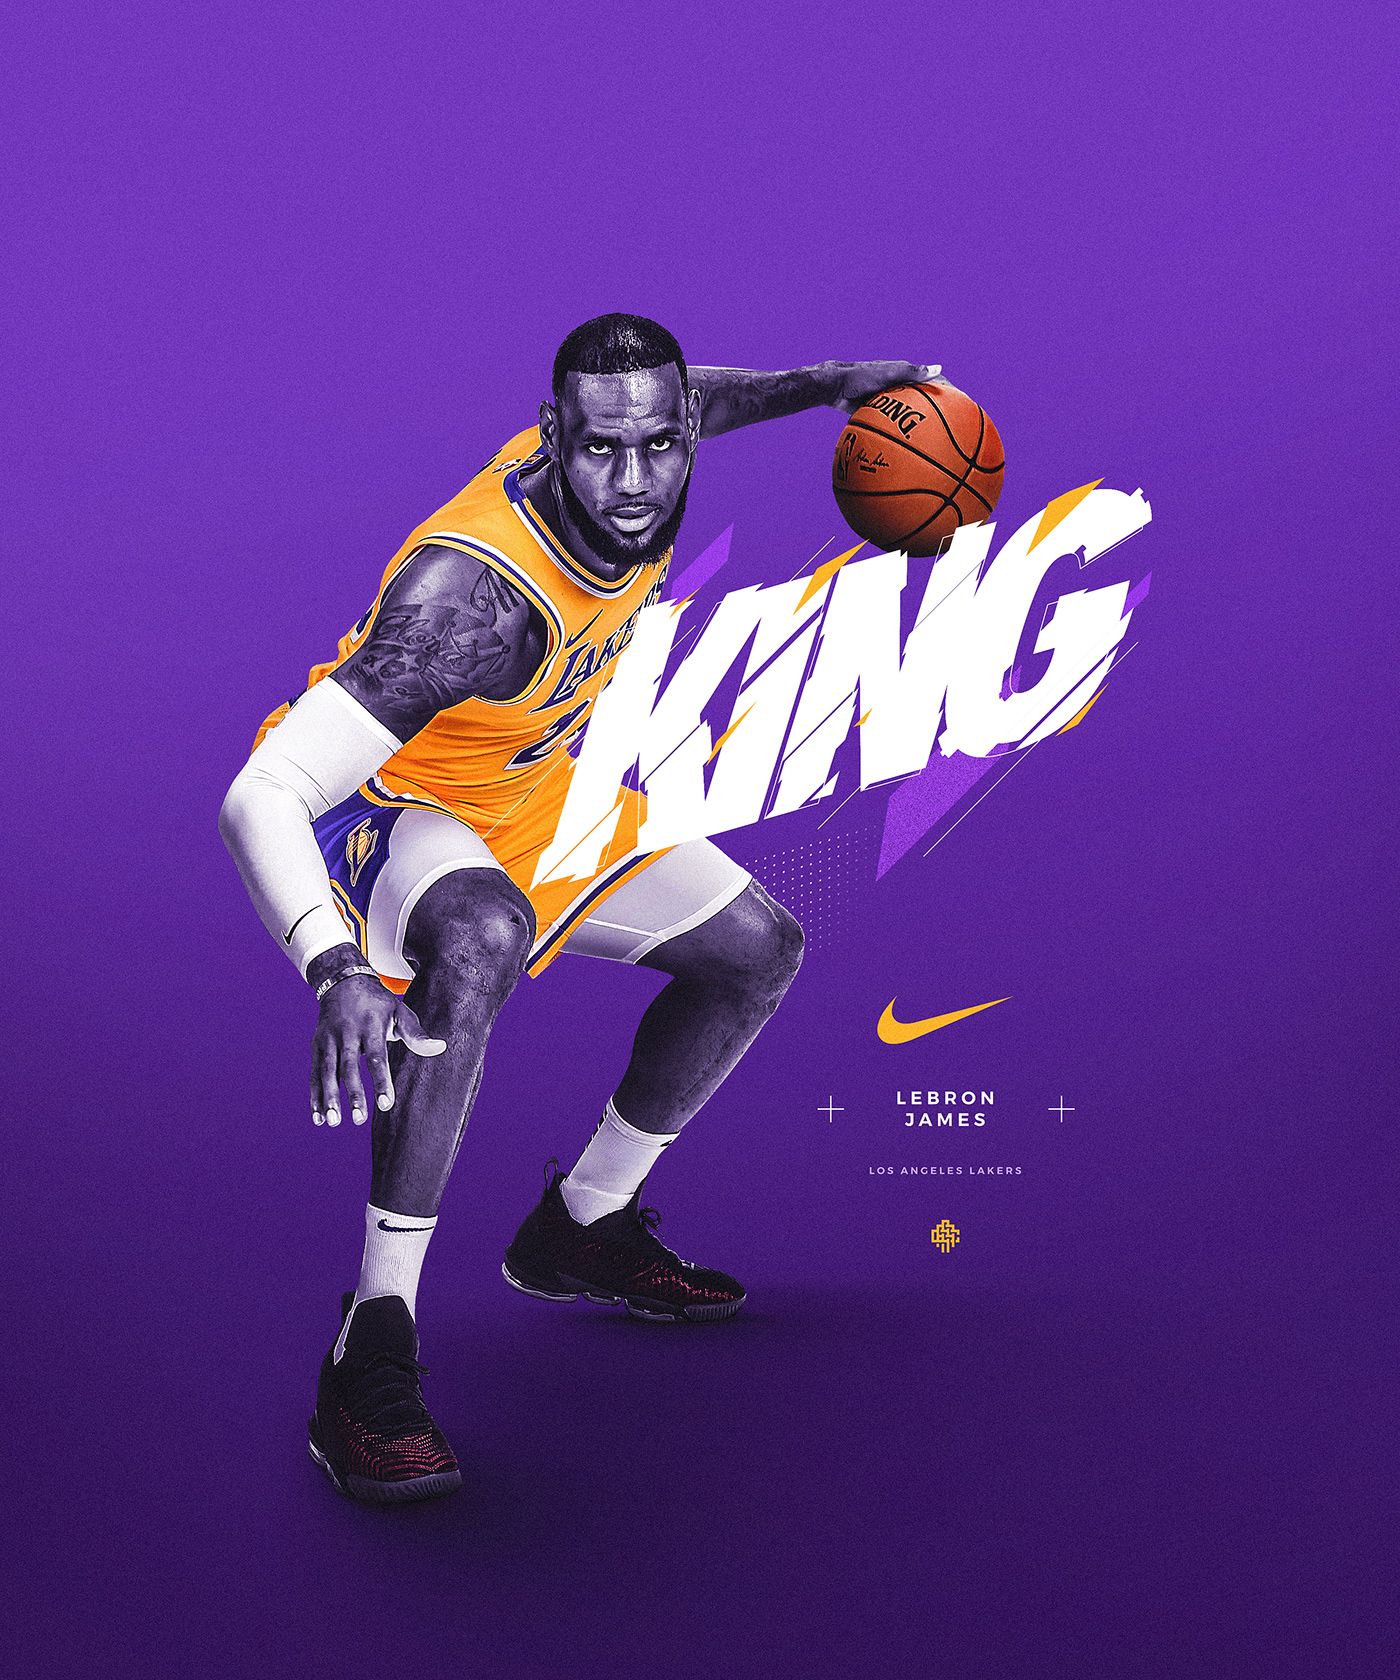 Background Lebron James Wallpaper Discover more American